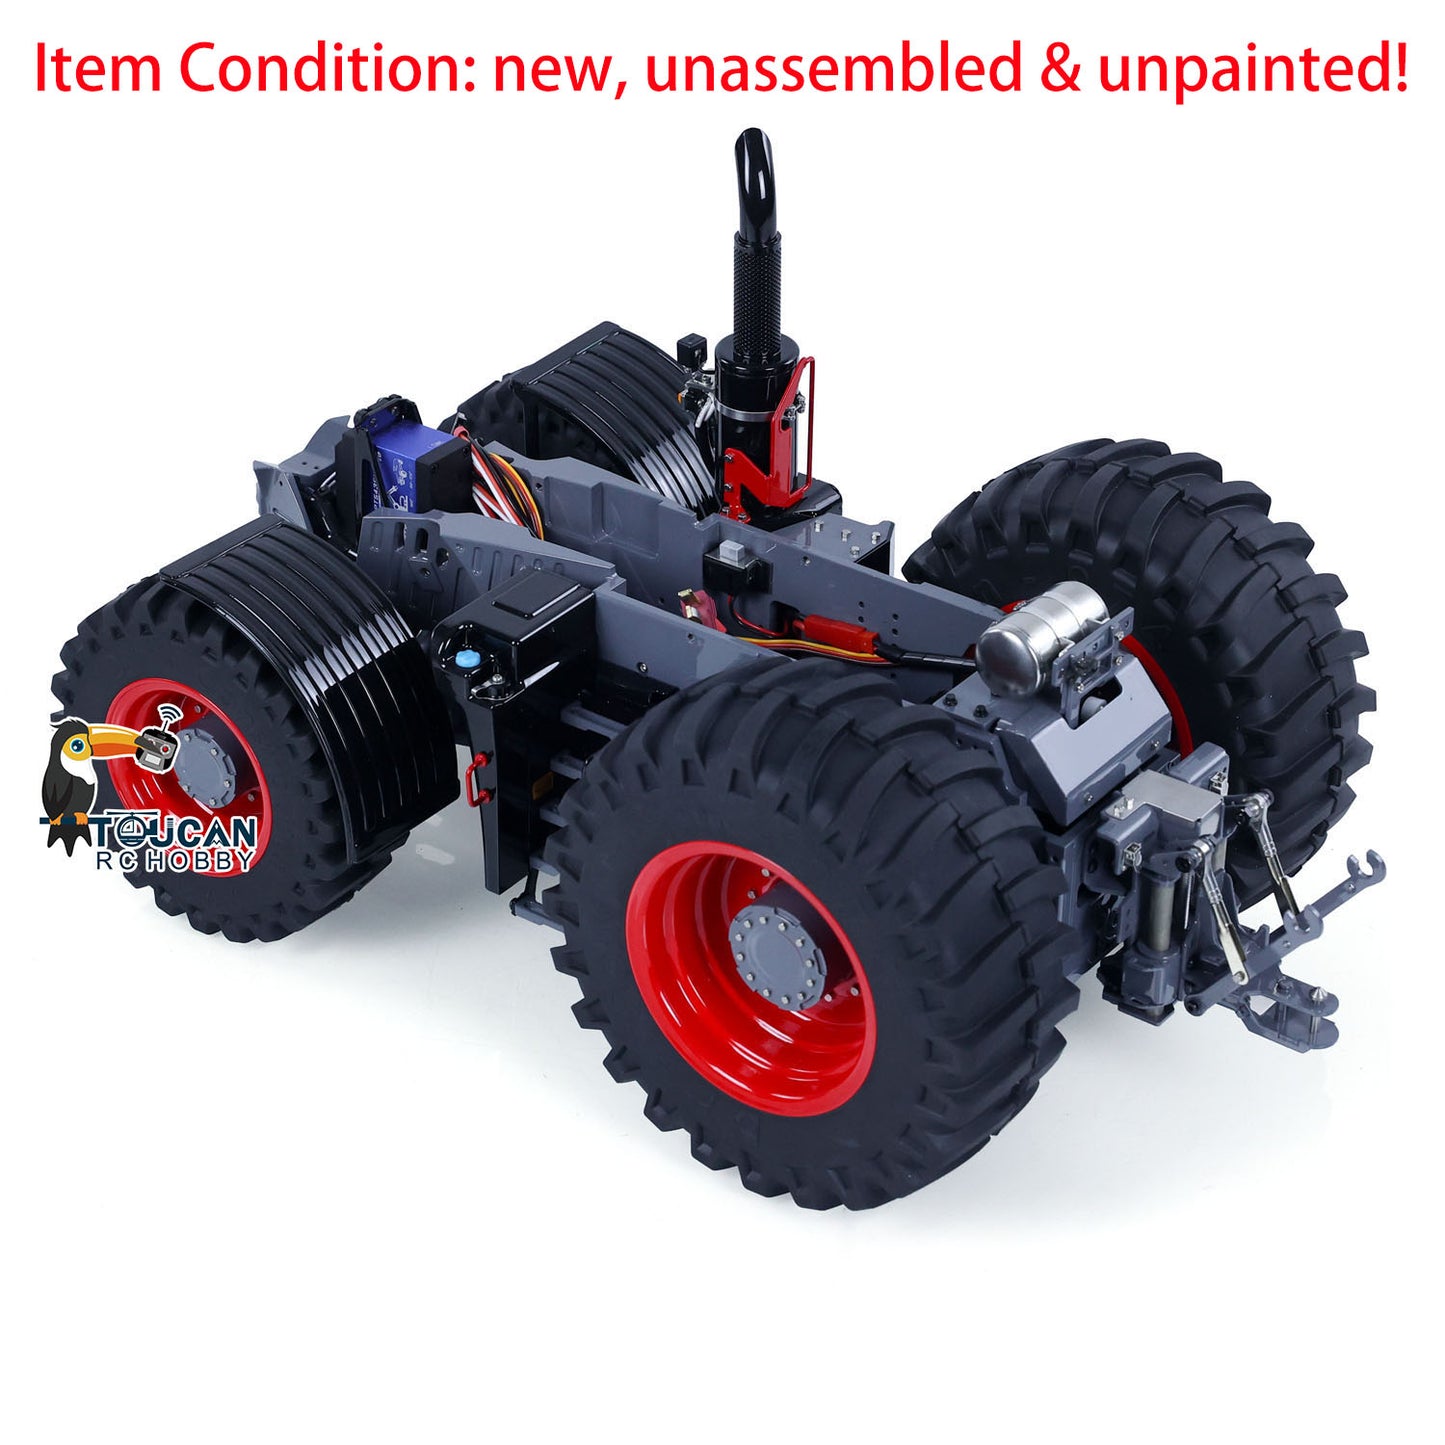 IN STOCK Metal Chassis for LESU 1/16 4X4 1050 RC Tractors Remote Control Car Model Kits Unpainted Hobby Model DIY Spare Parts